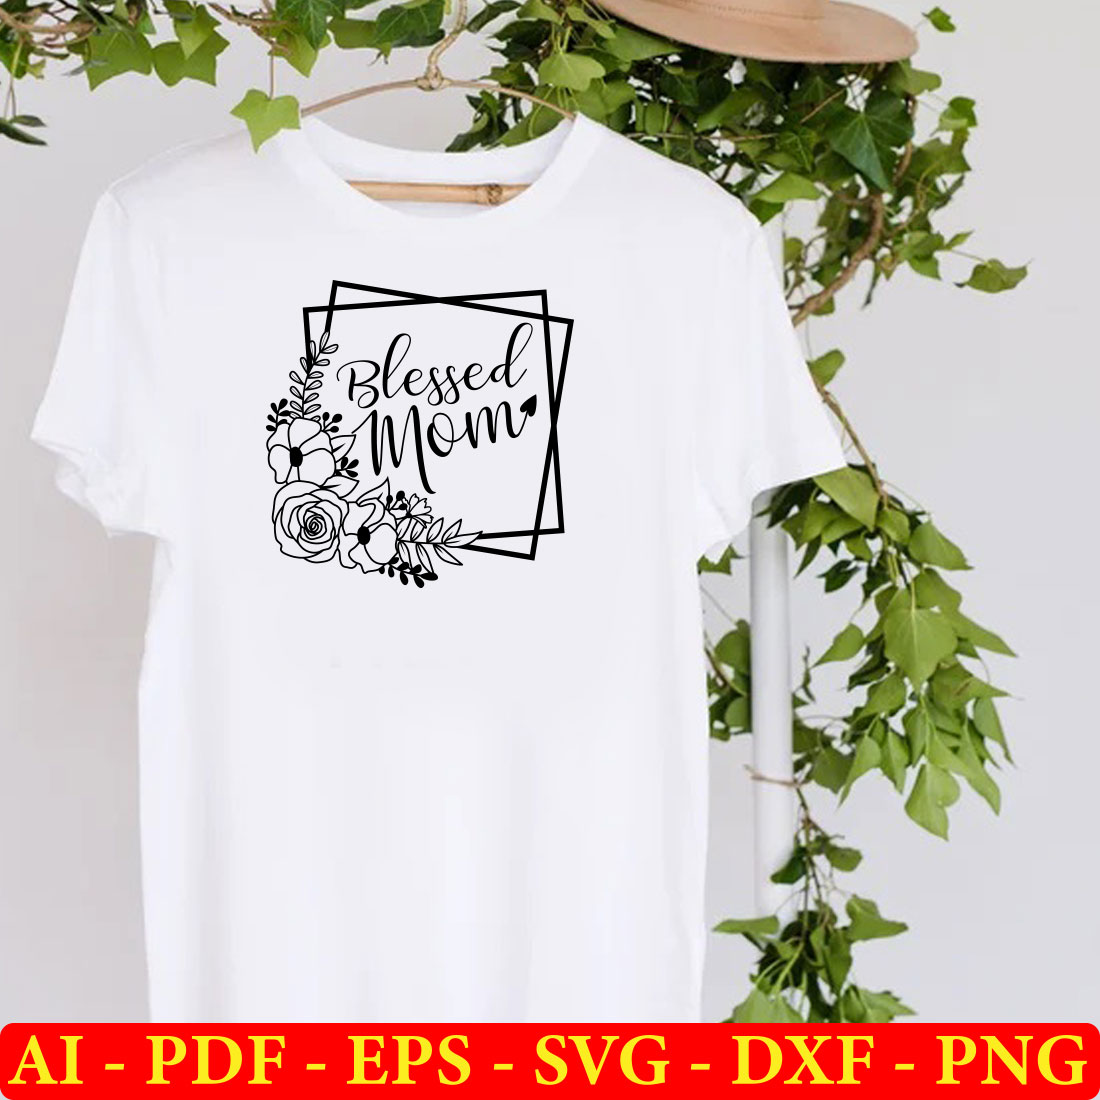 White t - shirt with a floral design on it.